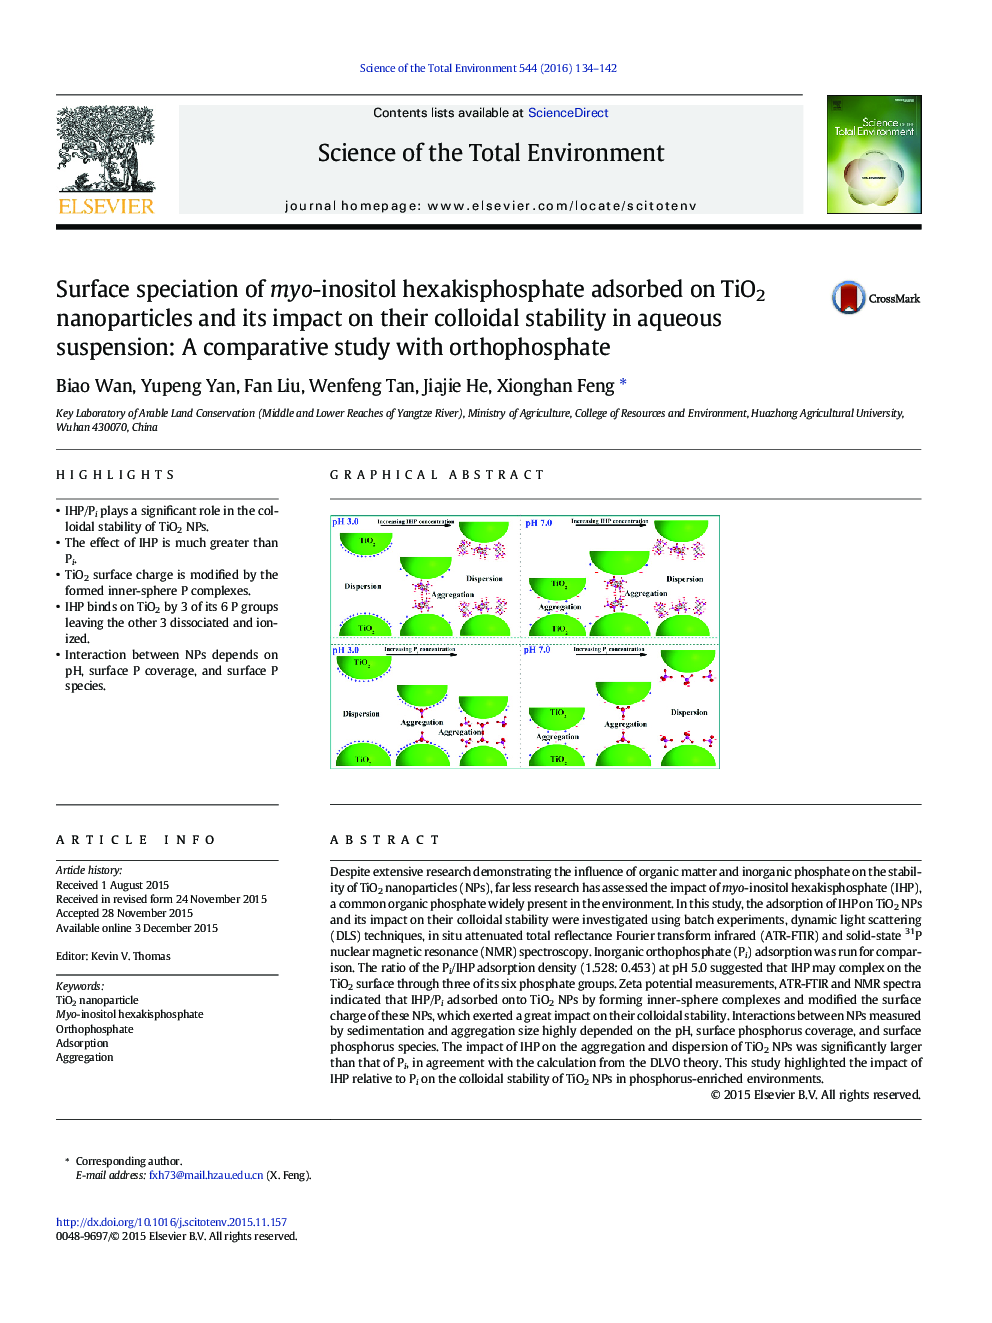 Surface speciation of myo-inositol hexakisphosphate adsorbed on TiO2 nanoparticles and its impact on their colloidal stability in aqueous suspension: A comparative study with orthophosphate